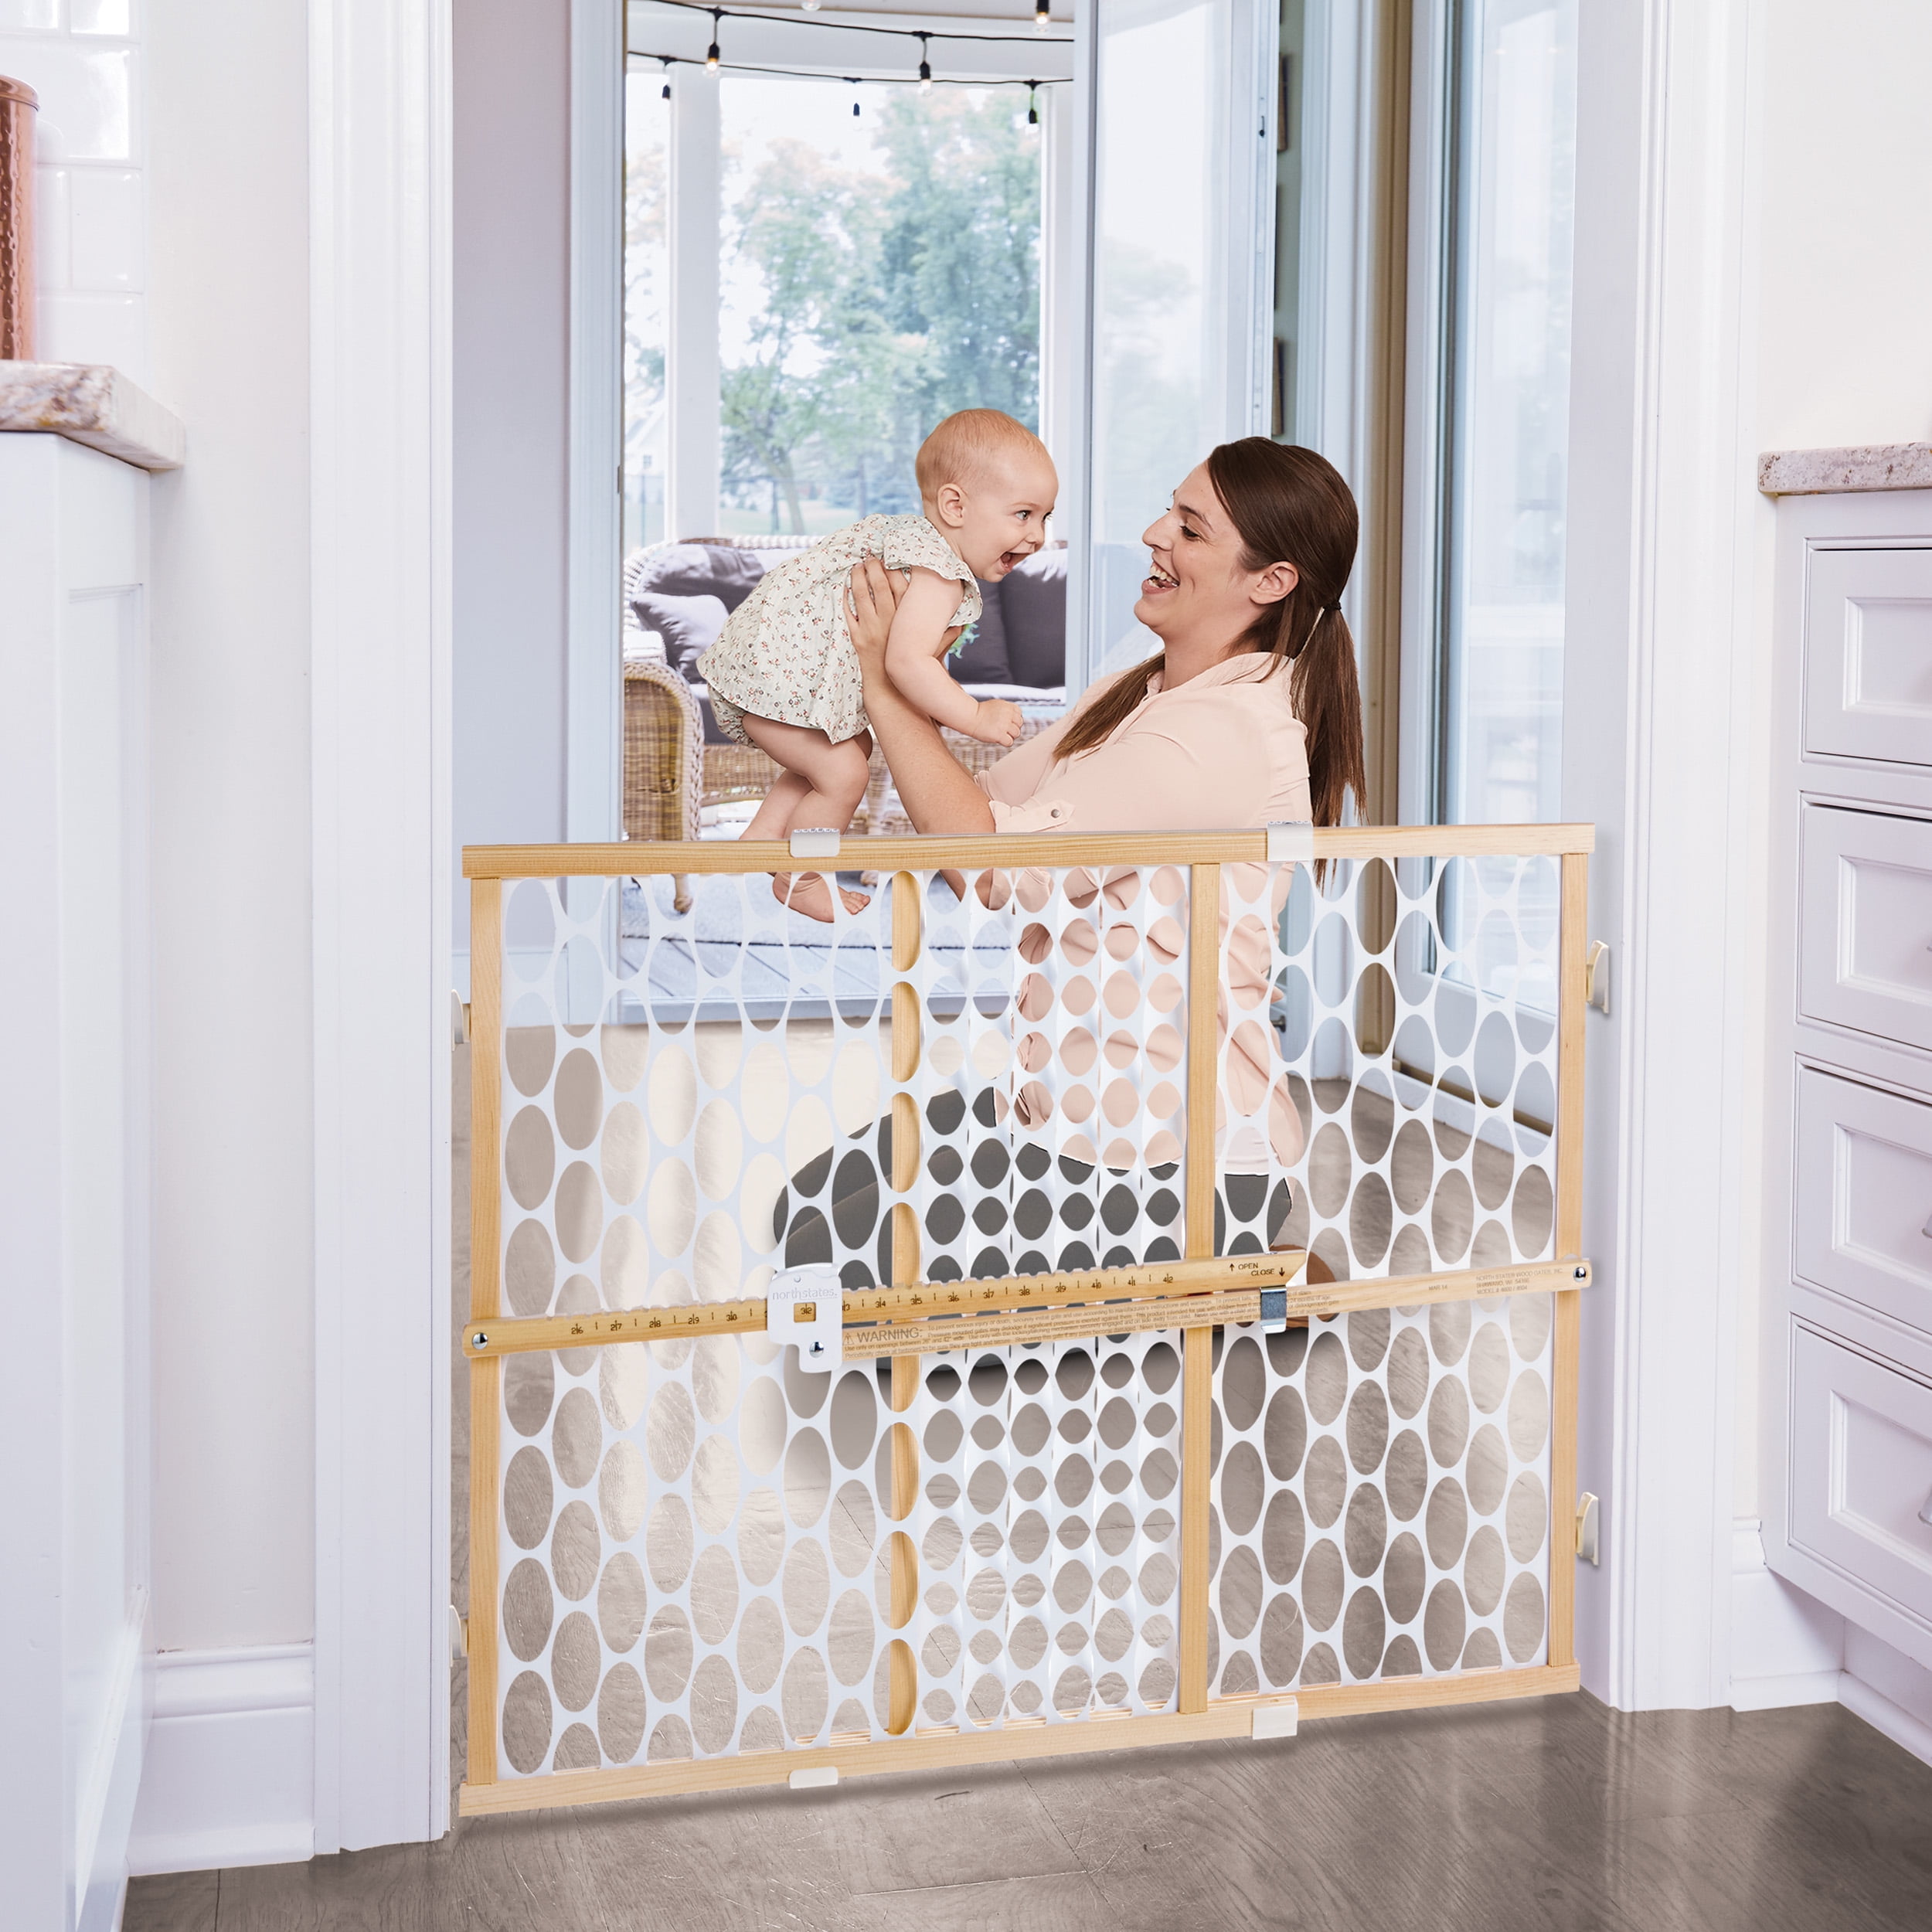 Pressure Mount Fits 26.5-42 Wide : Easy Installation with Memory Feature 2-Pack 23Tall,Sustainable Hardwood & White Oval Mesh Toddleroo by North States 42 Wide Quick Fit Oval Mesh Baby Gate 